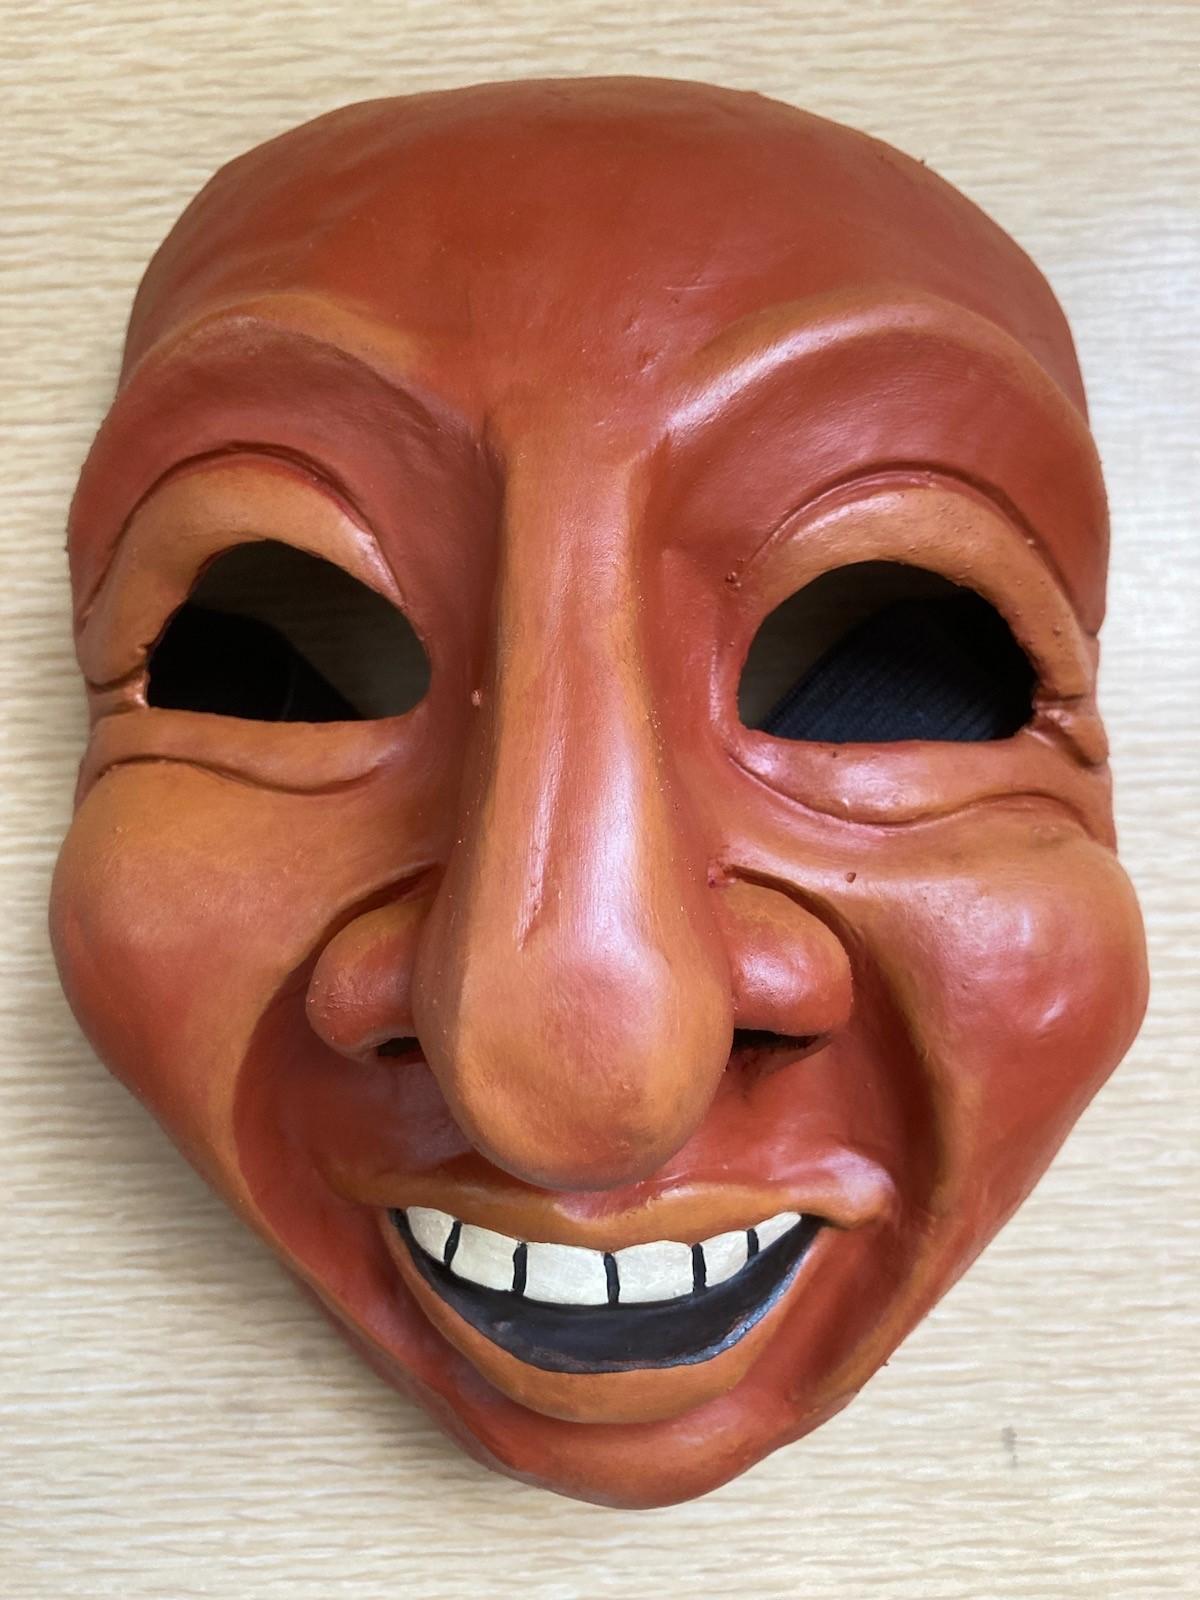 Cartoonish laughing face made of clay, with a big nose and empty eye sockets